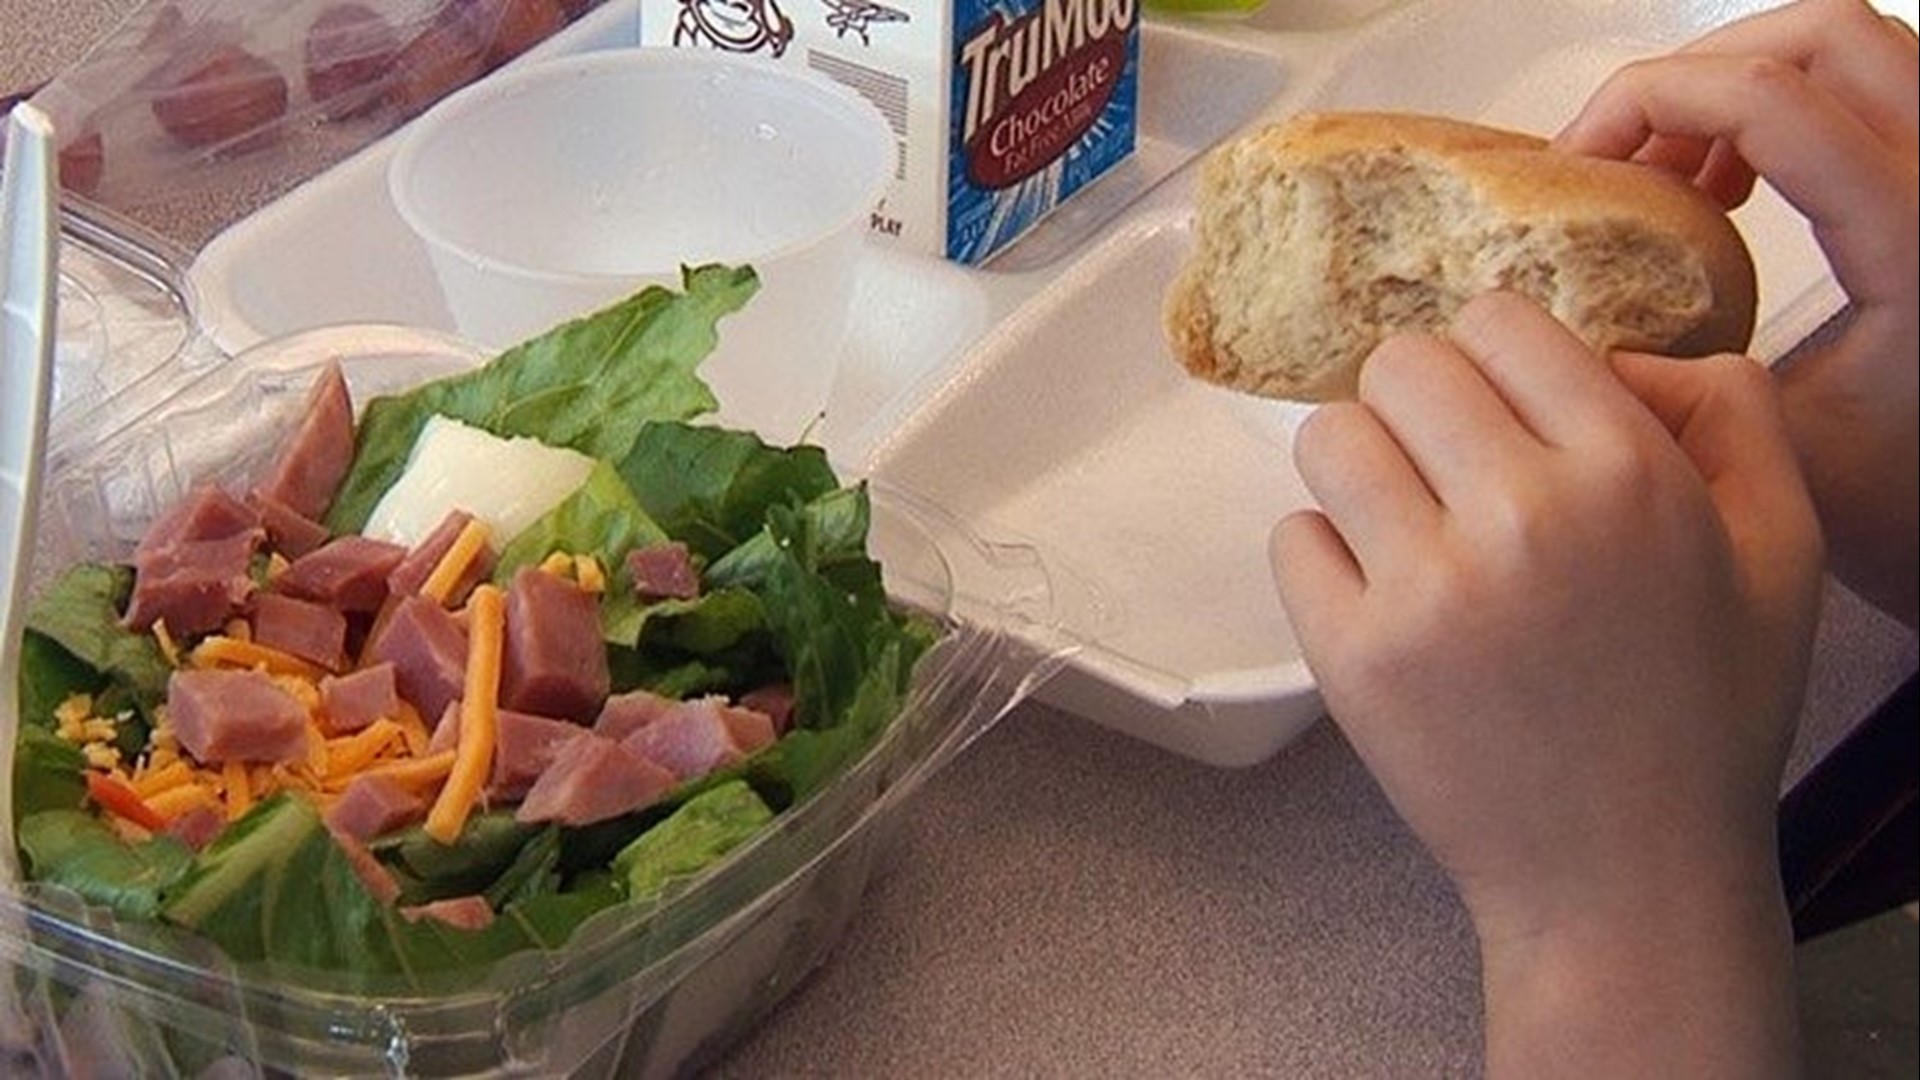 Sacramento City Unified School District officials said children will not need to fill out paperwork or provide an ID to receive a free breakfast and lunch.